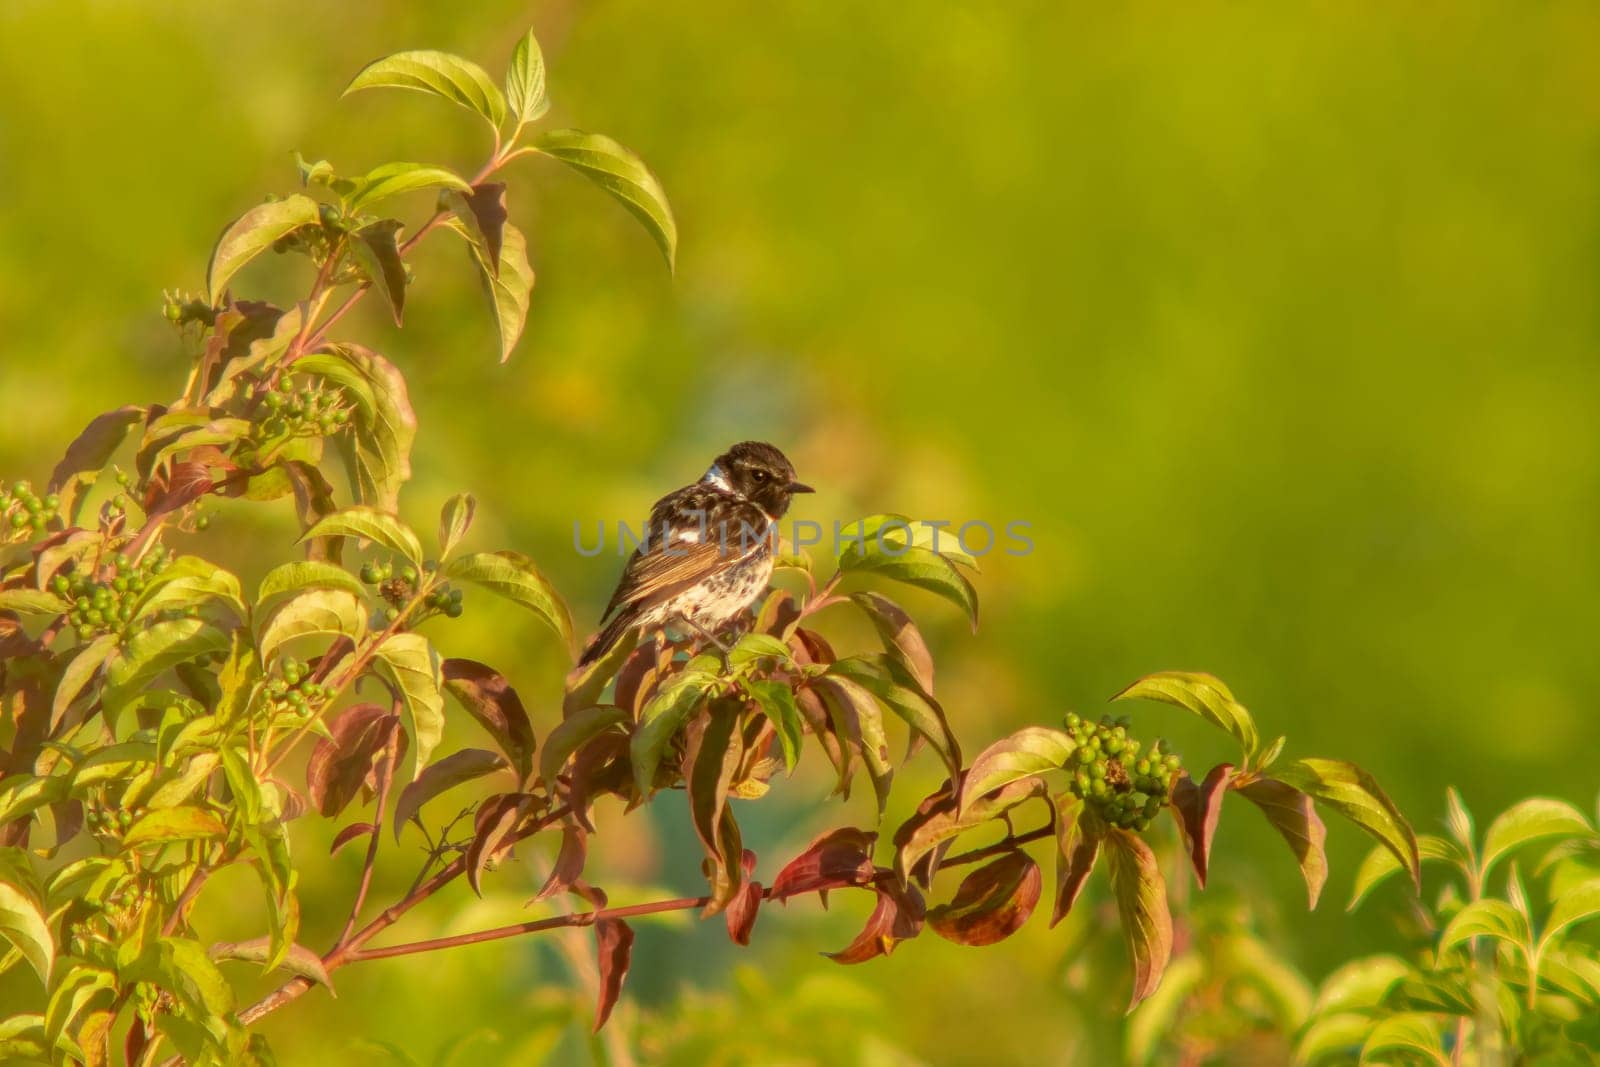 A male stonechat (Saxicola rubicola) sits in a green bush looking for insects